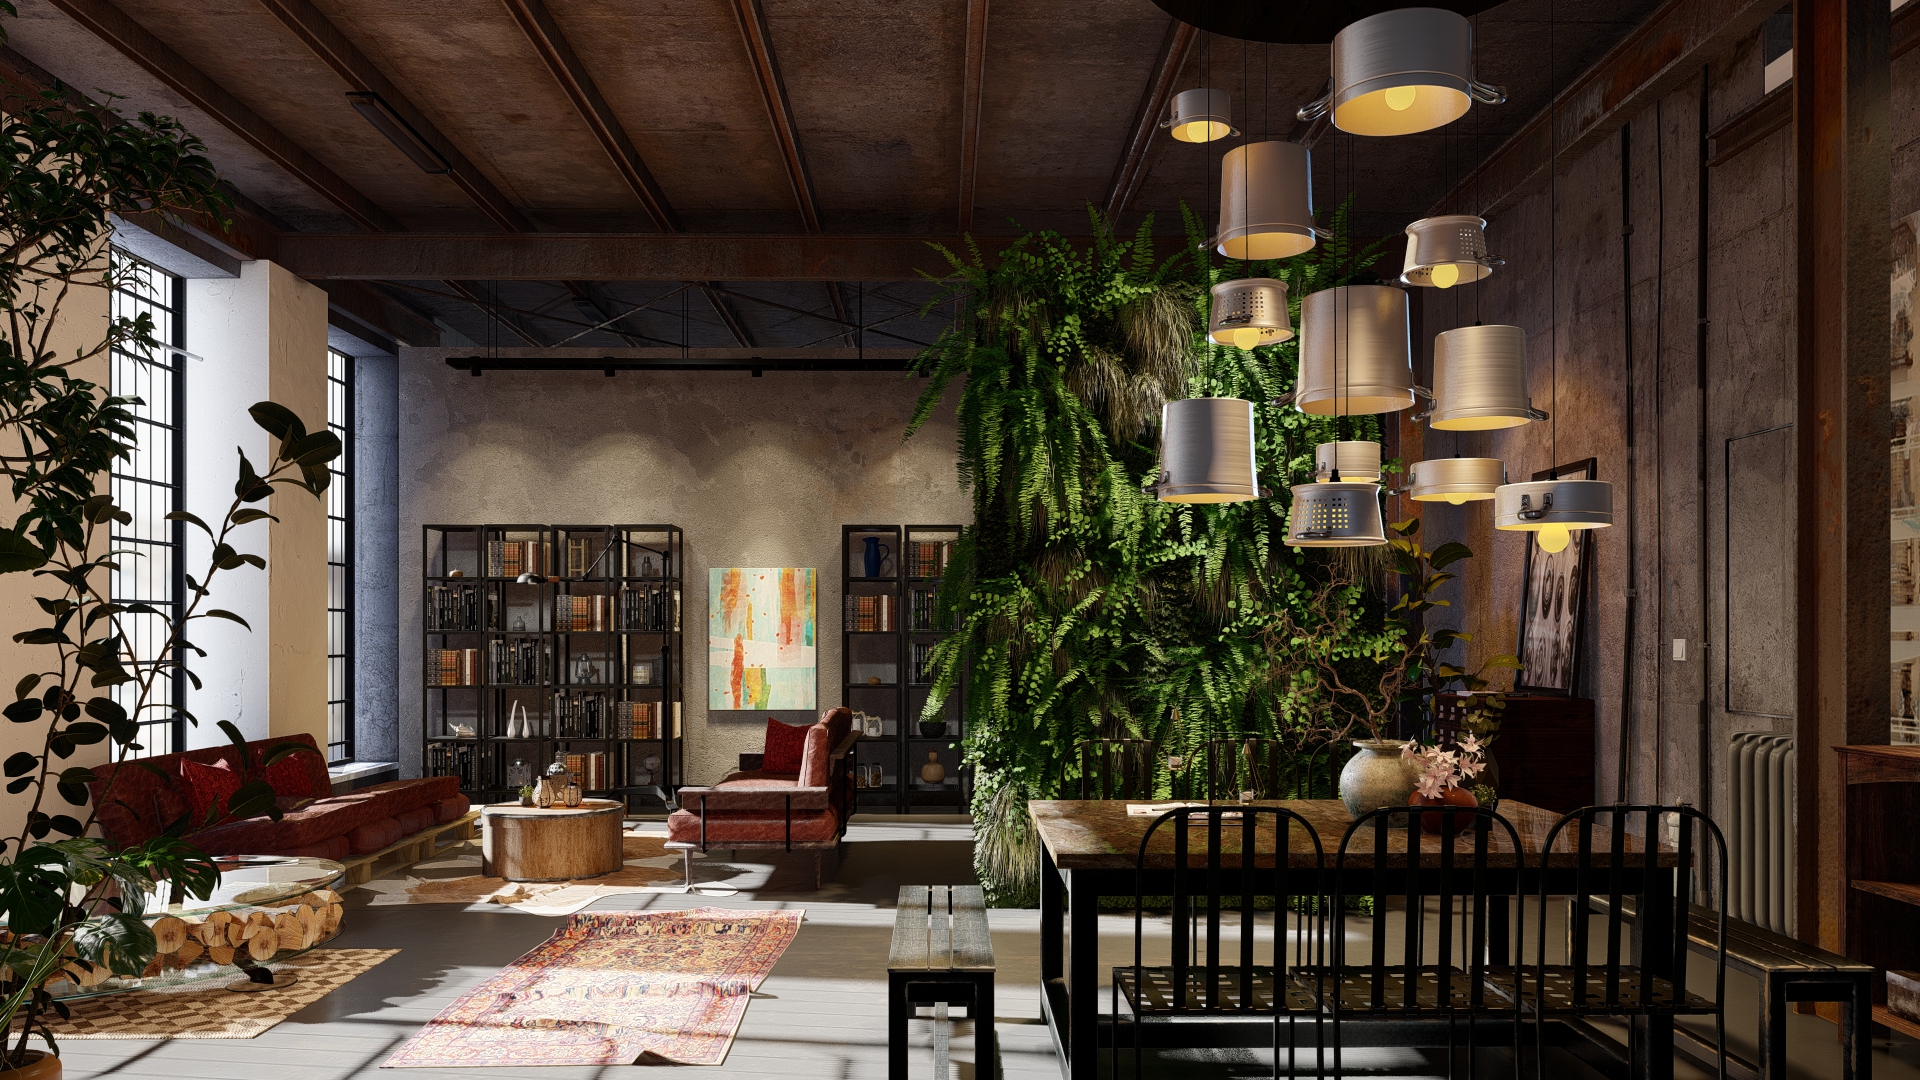 Hip Cafe, rendered in Lumion 12 | Lumion Architectural Visualization Software